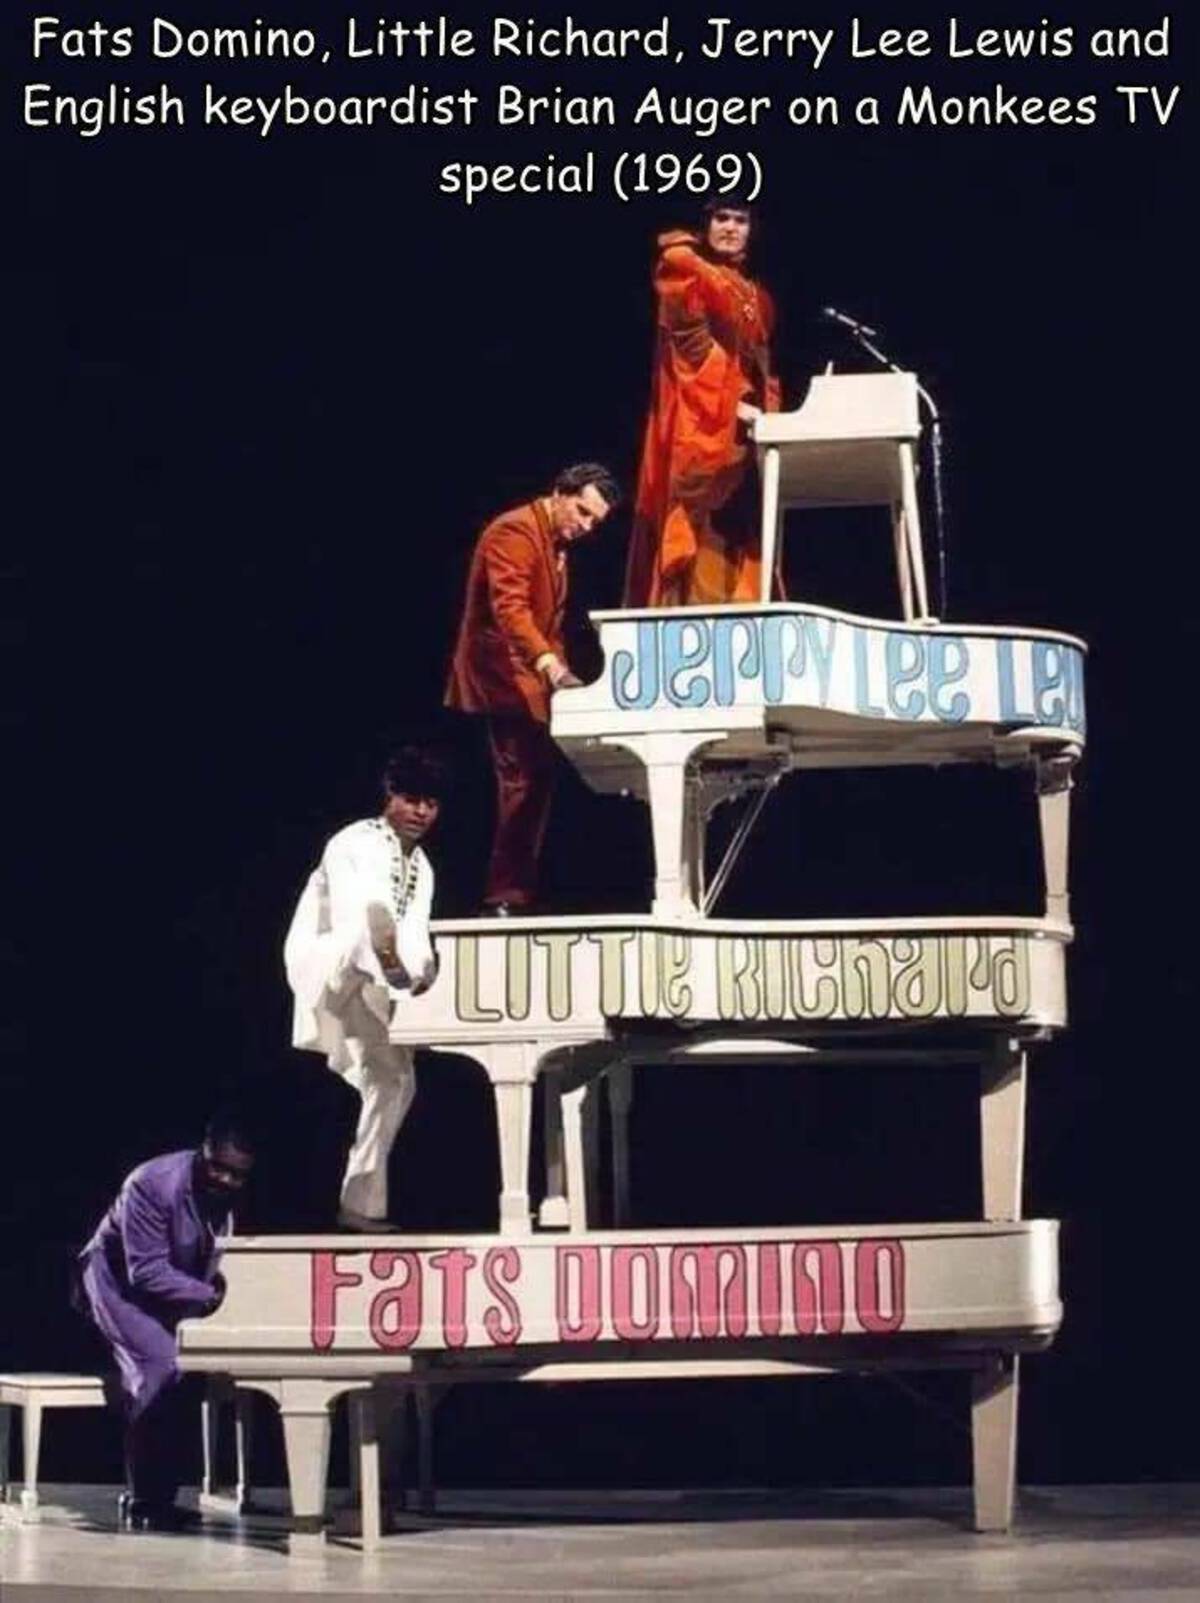 brian auger fat domino little richard jerry lee lewis - Fats Domino, Little Richard, Jerry Lee Lewis and English keyboardist Brian Auger on a Monkees Tv special 1969 Jerry Lee La Littie Richard Fats Domino